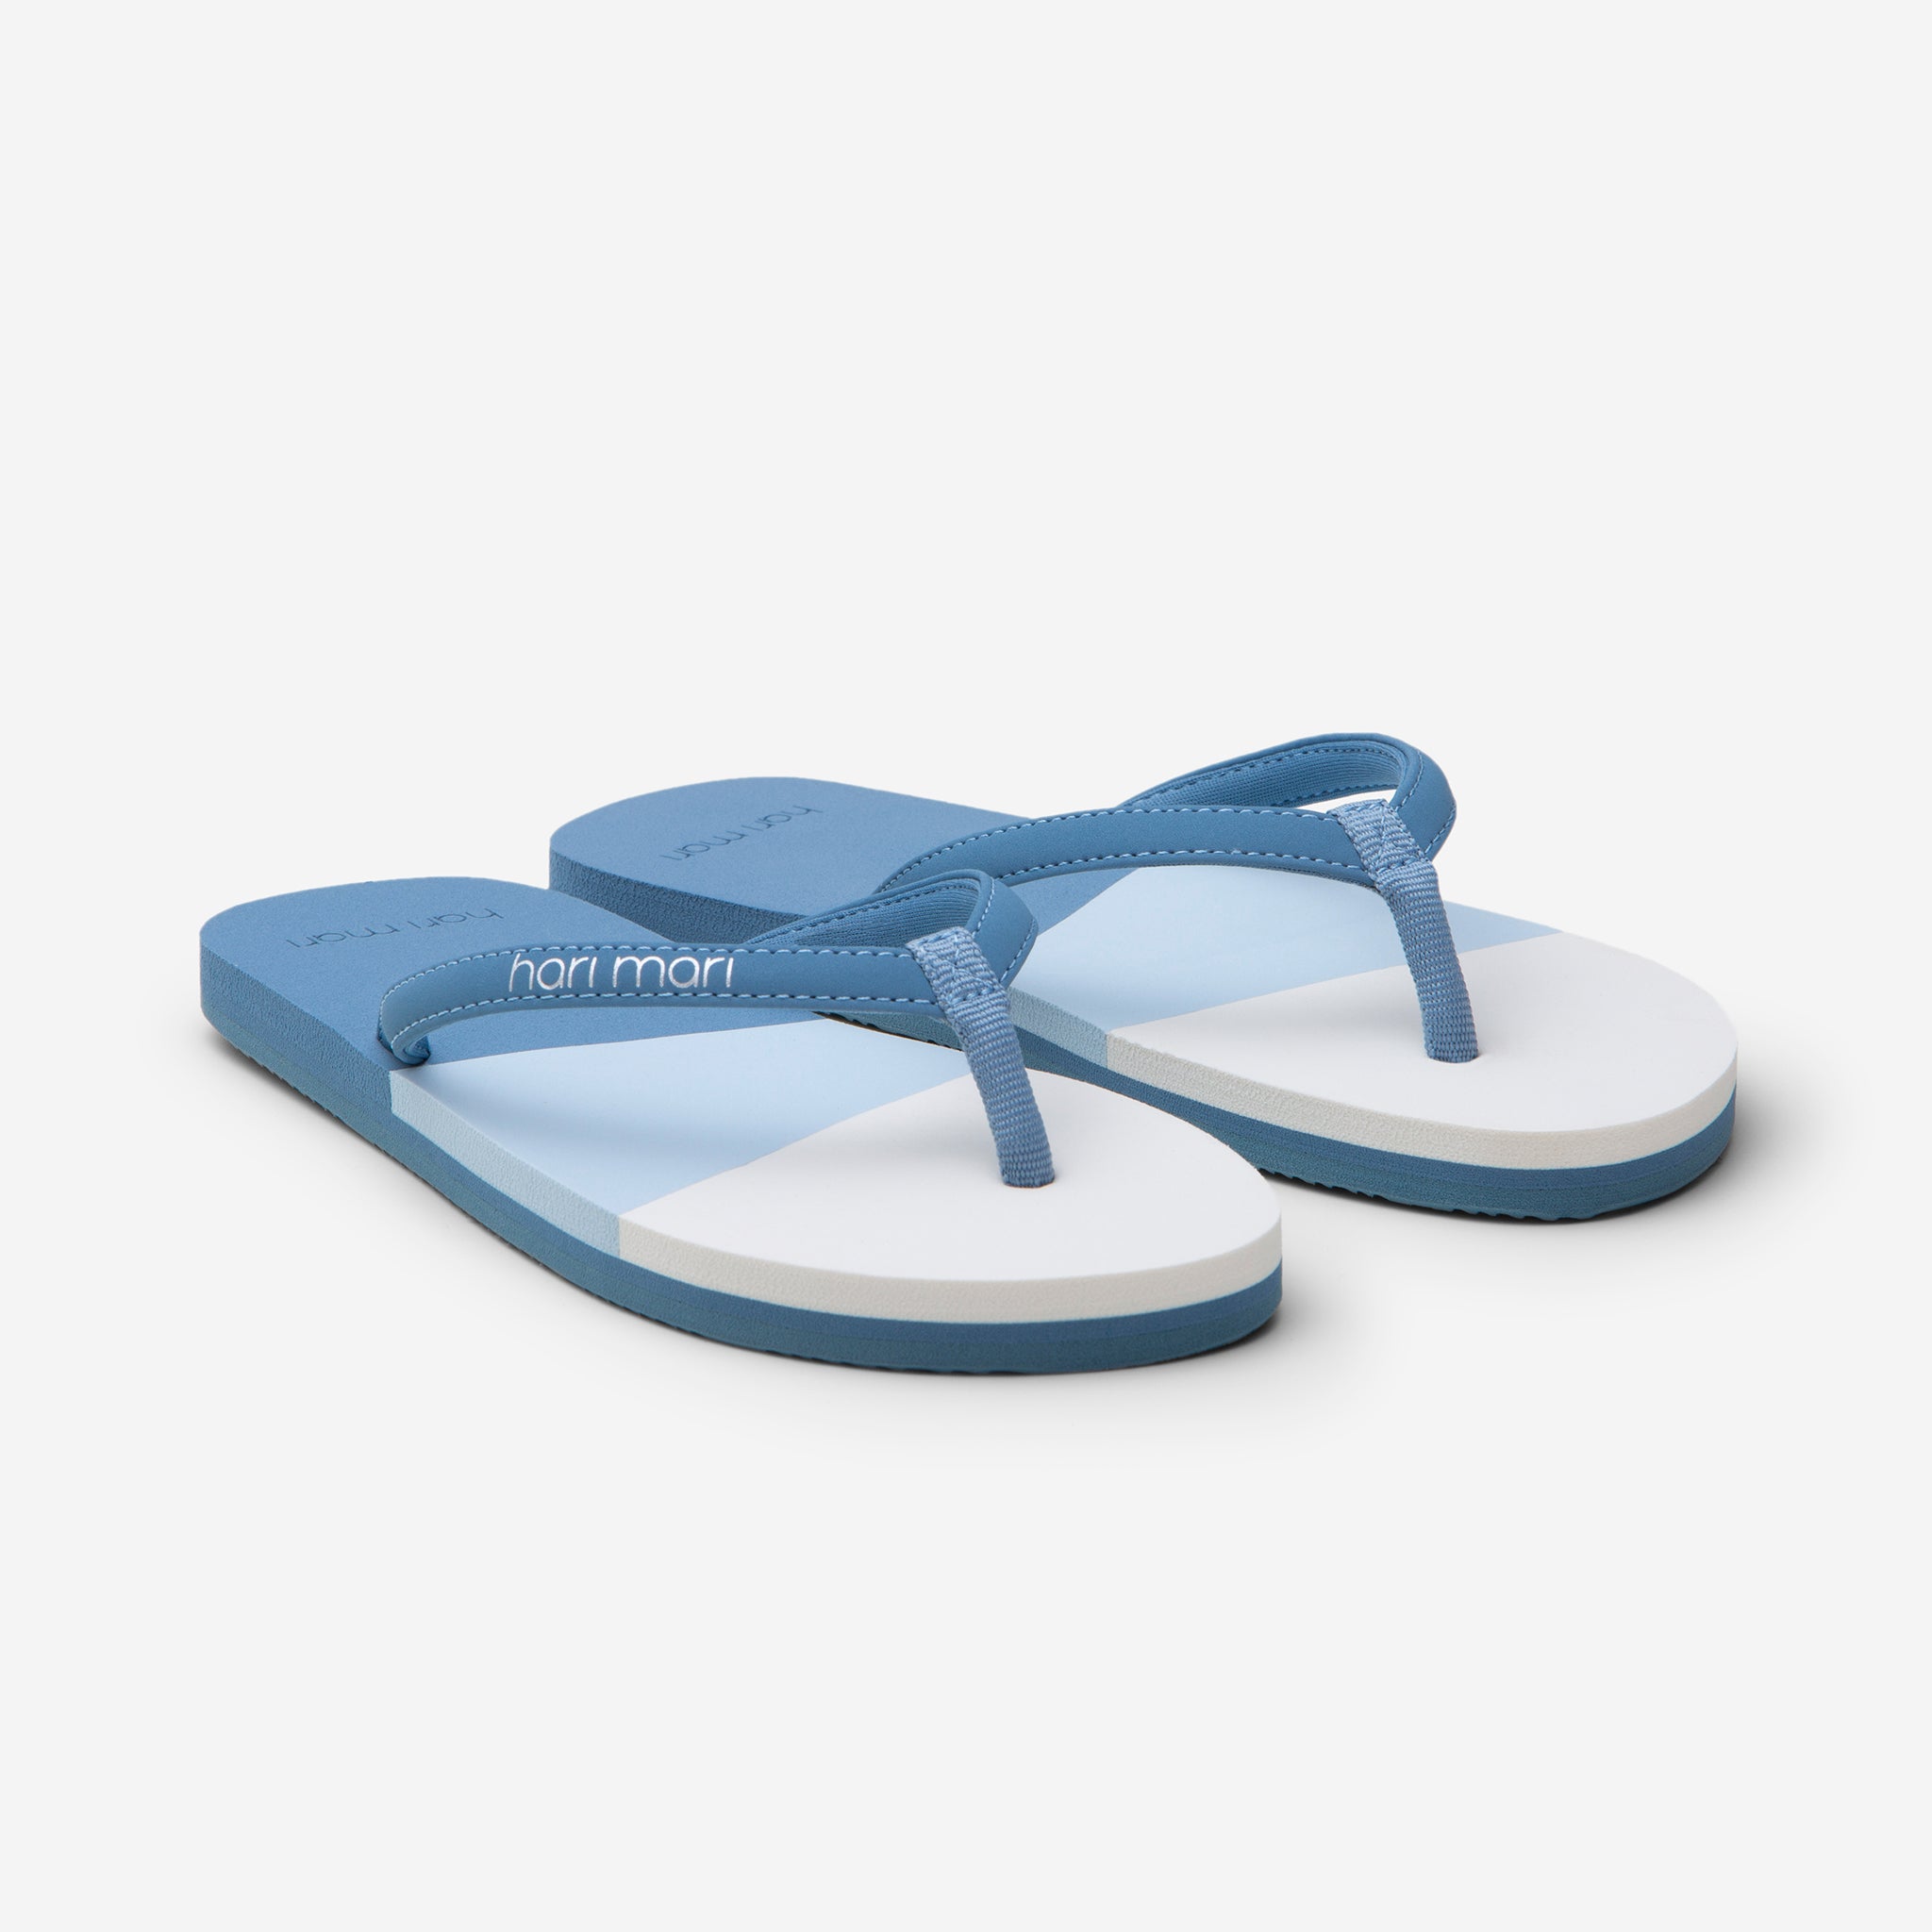 Hari Mari Youth Meadows Asana Flip Flops in Dusty Blue with multi colors on white background